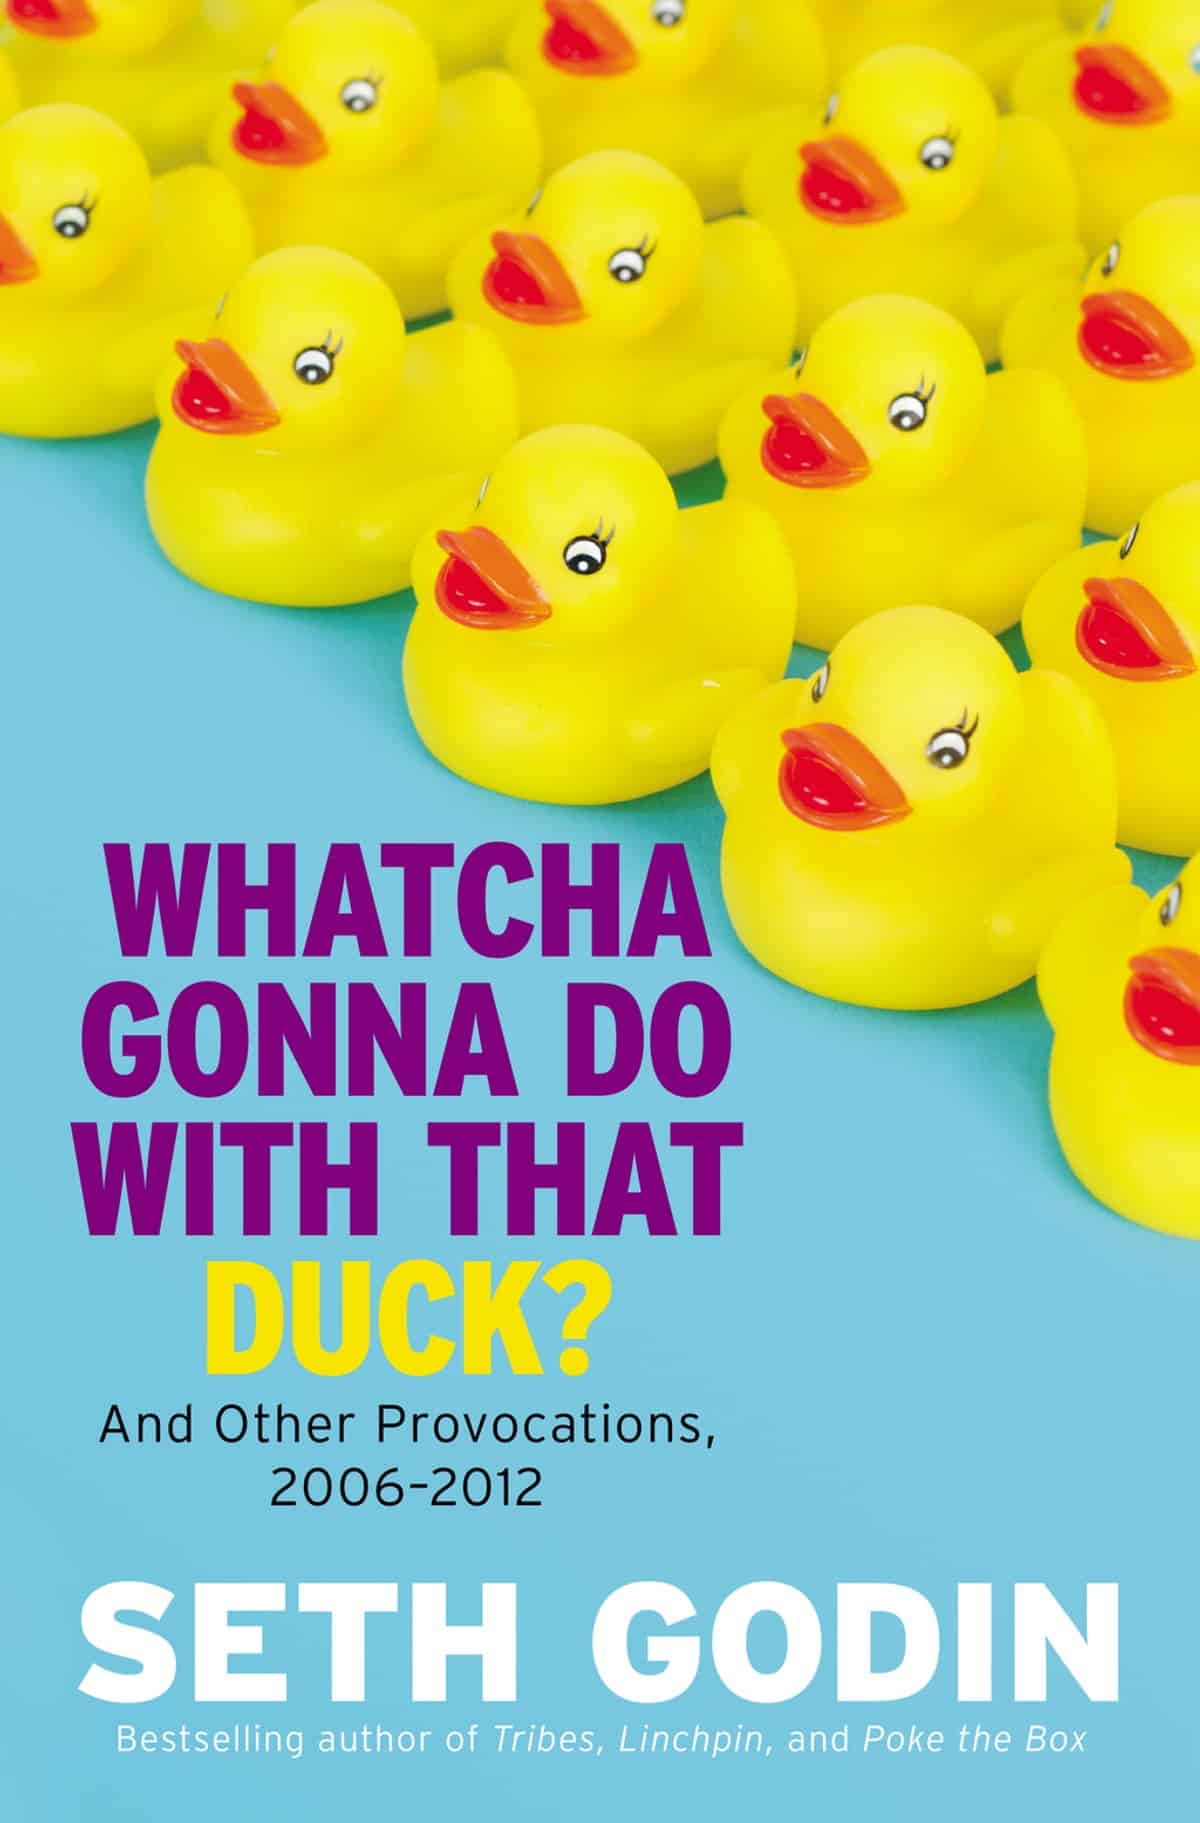 Whatcha Gonna Do with That Duck by Seth Godin